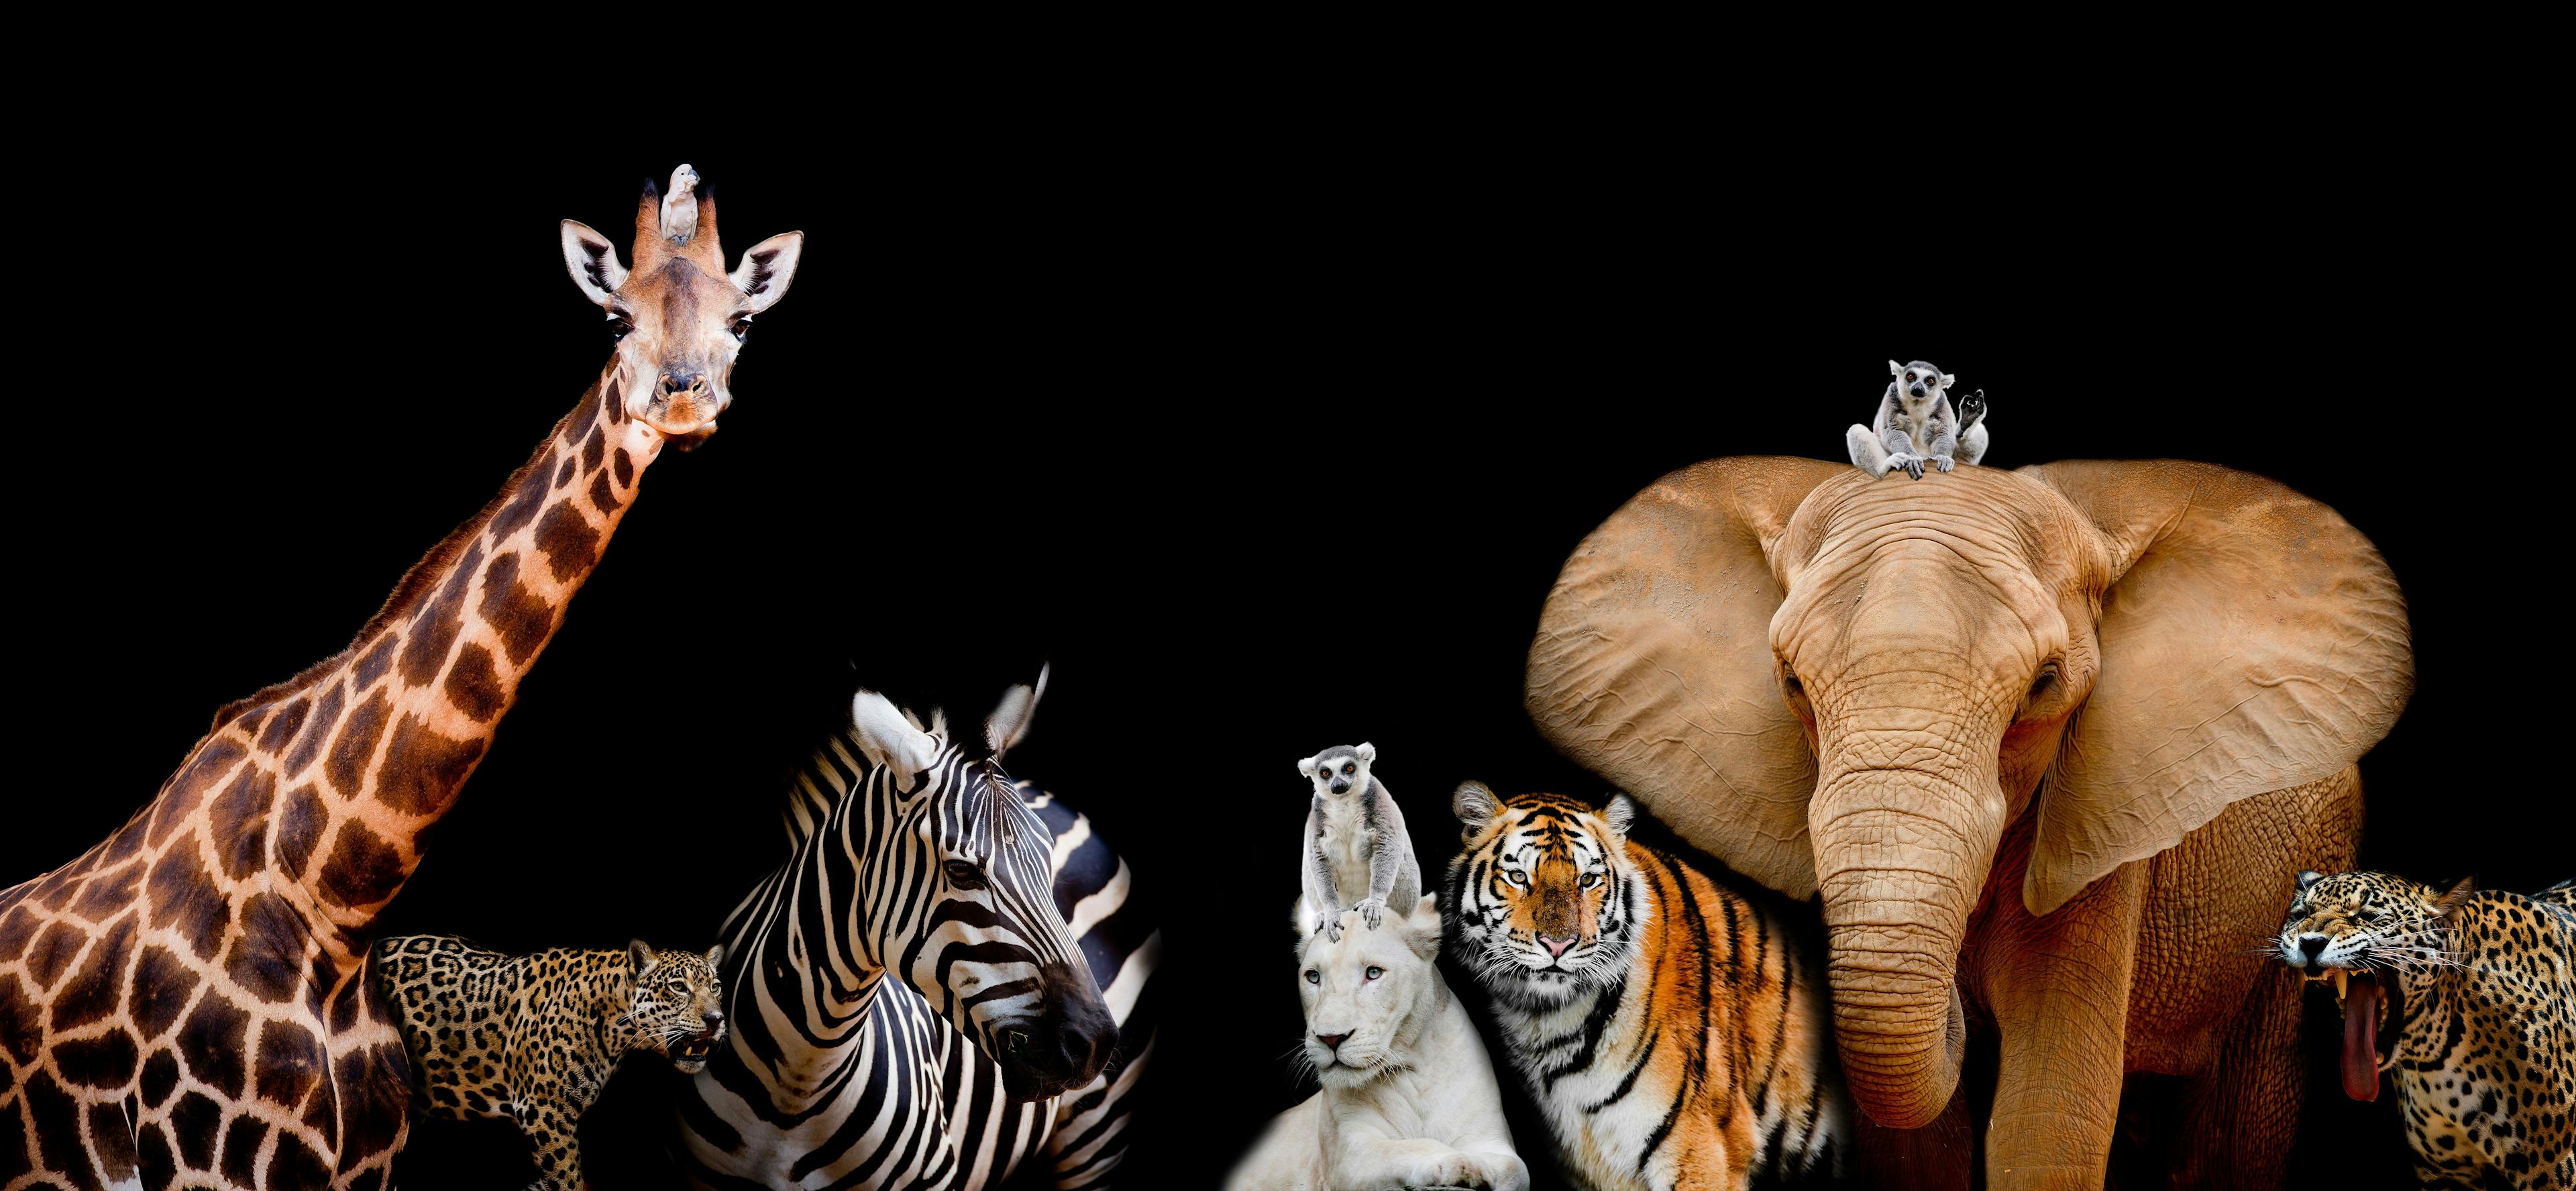 A group of animals are together on a black background with text | Image Credit: © art9858 - stock.adobe.com